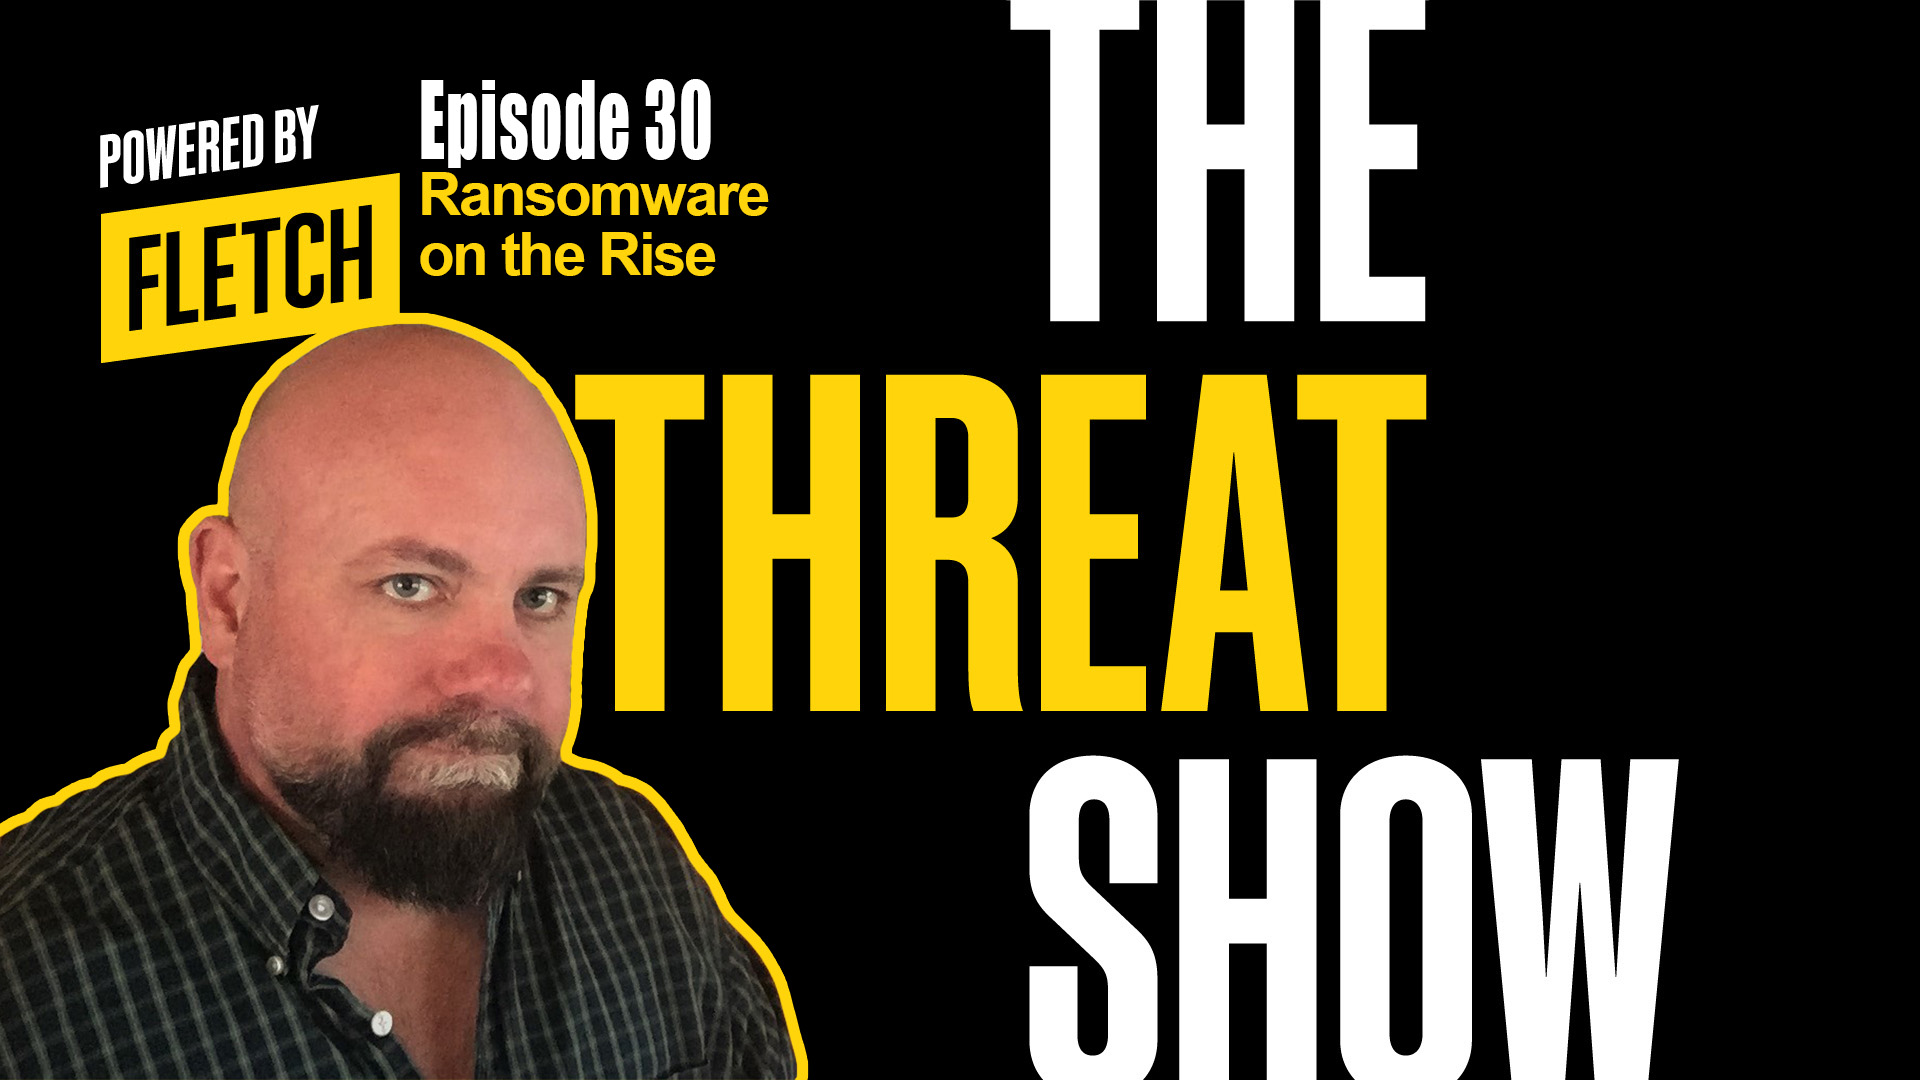 The Threat Show Ep. 30